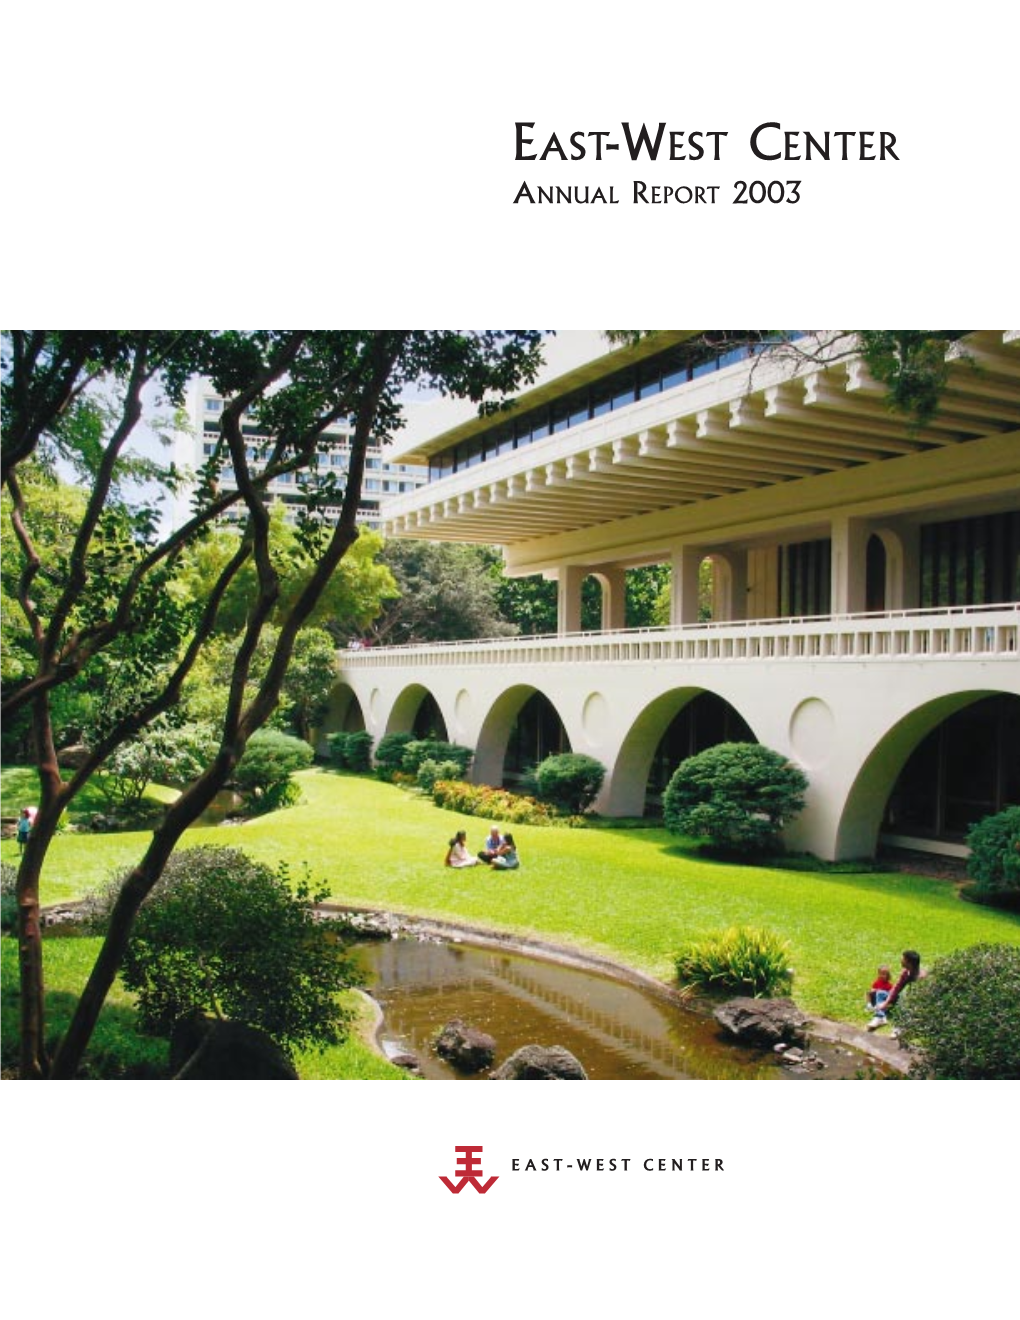 East-West Center Annual Report 2003